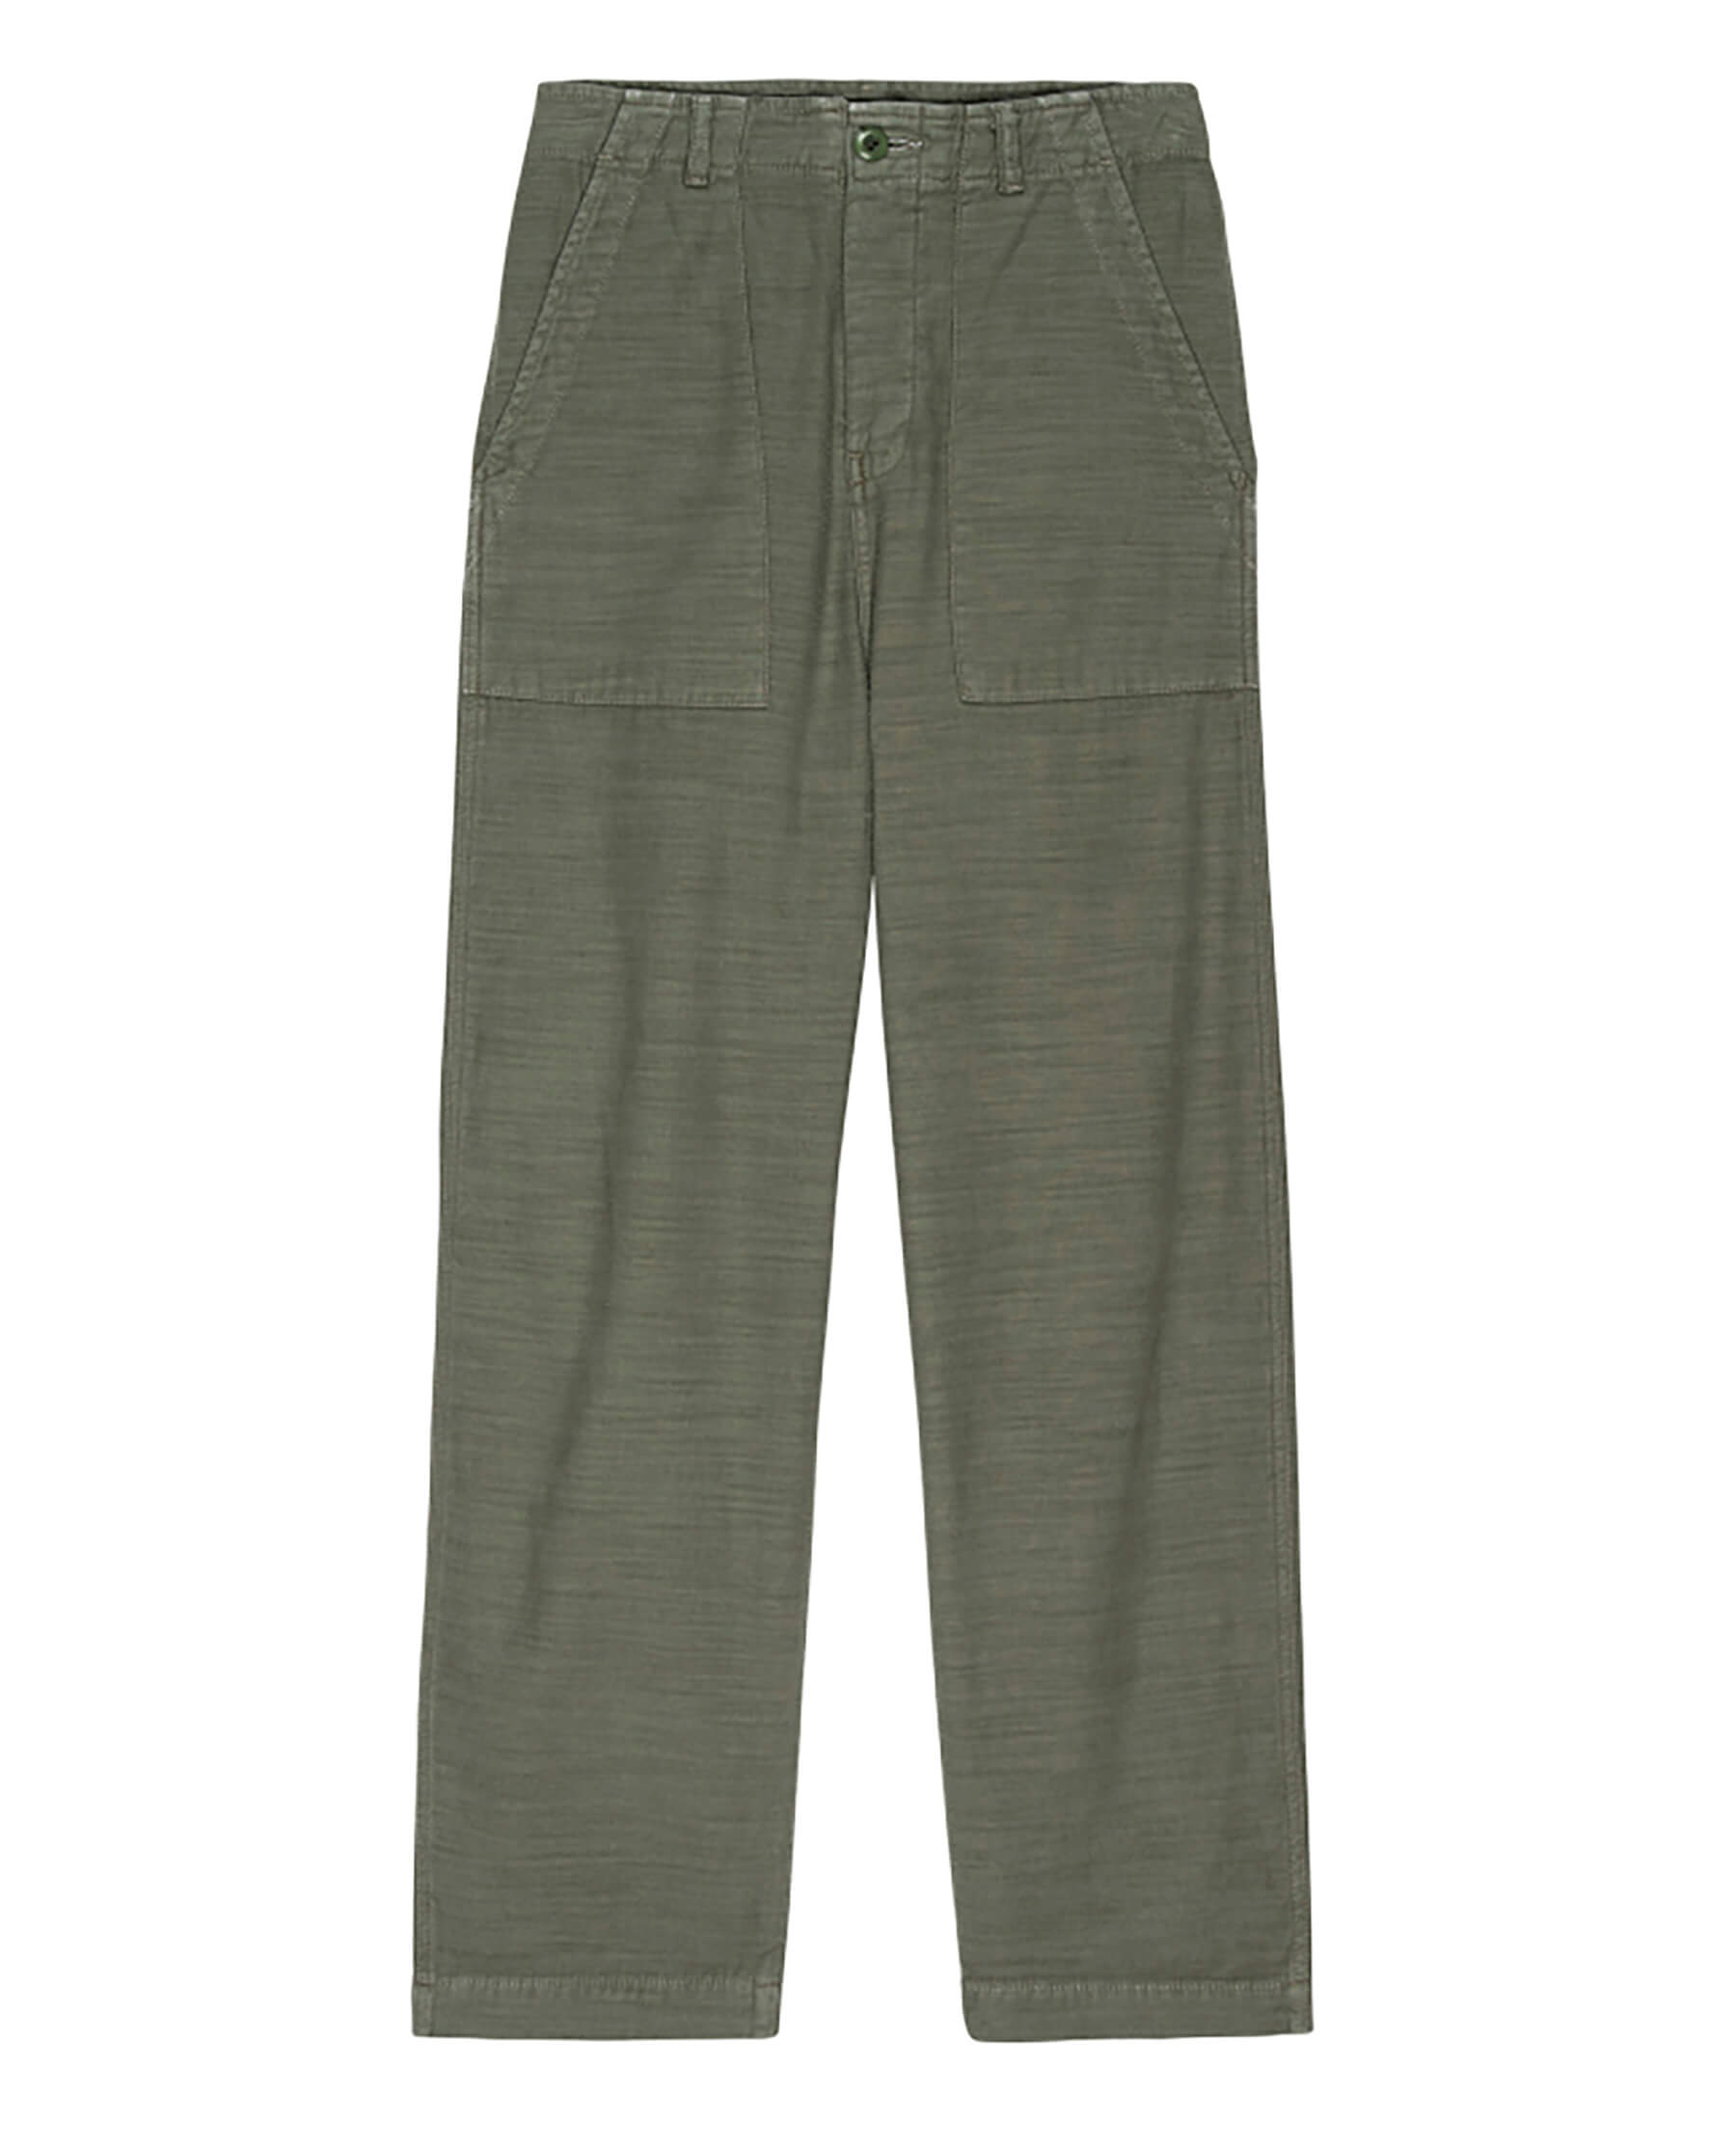 The Admiral Pant. -- Army BOTTOMS THE GREAT. SP24 D2